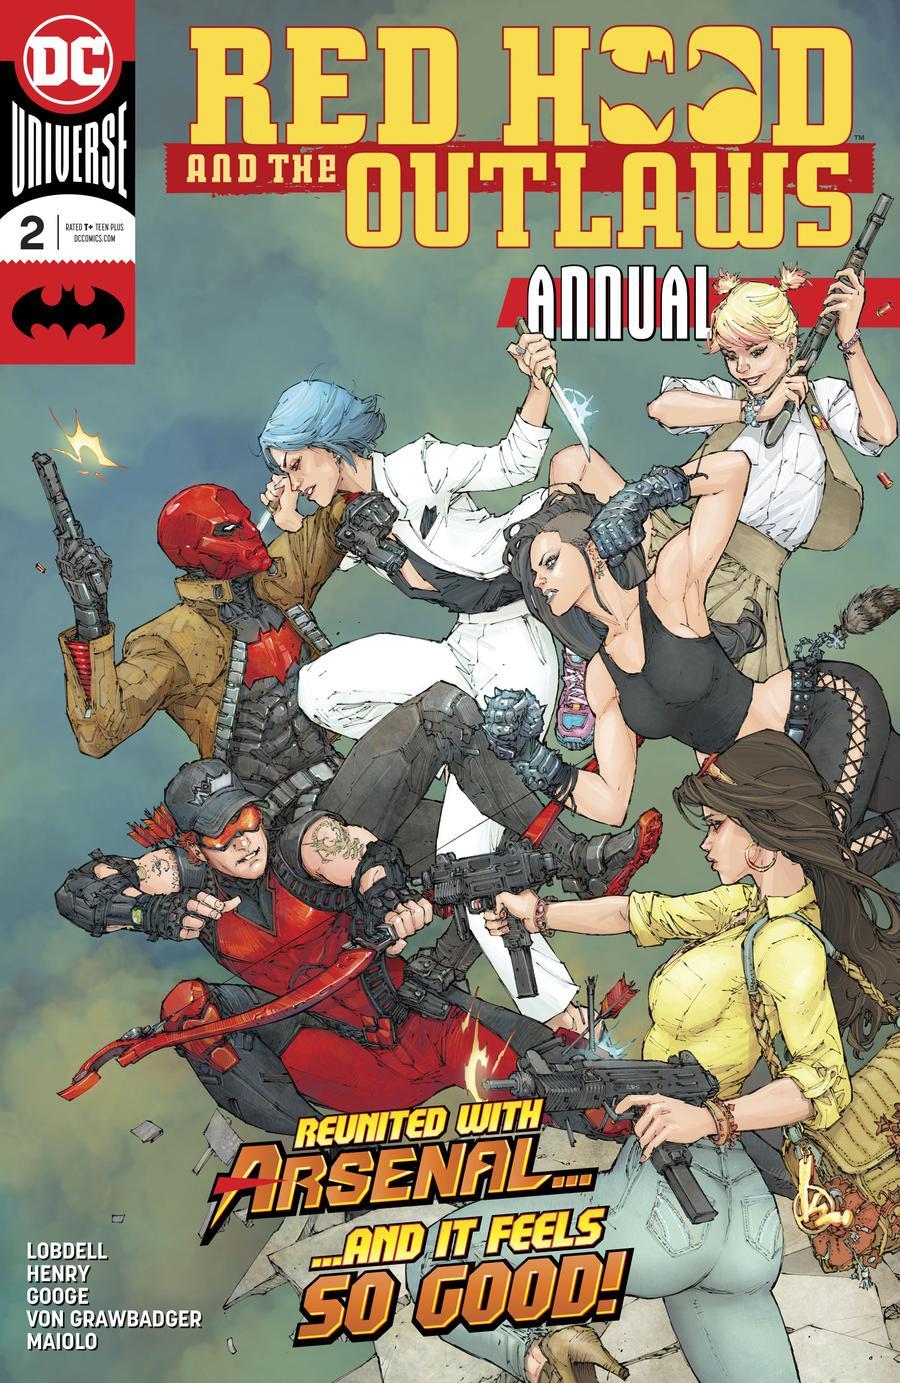 Red Hood and the Outlaws Vol. 2 Annual #2